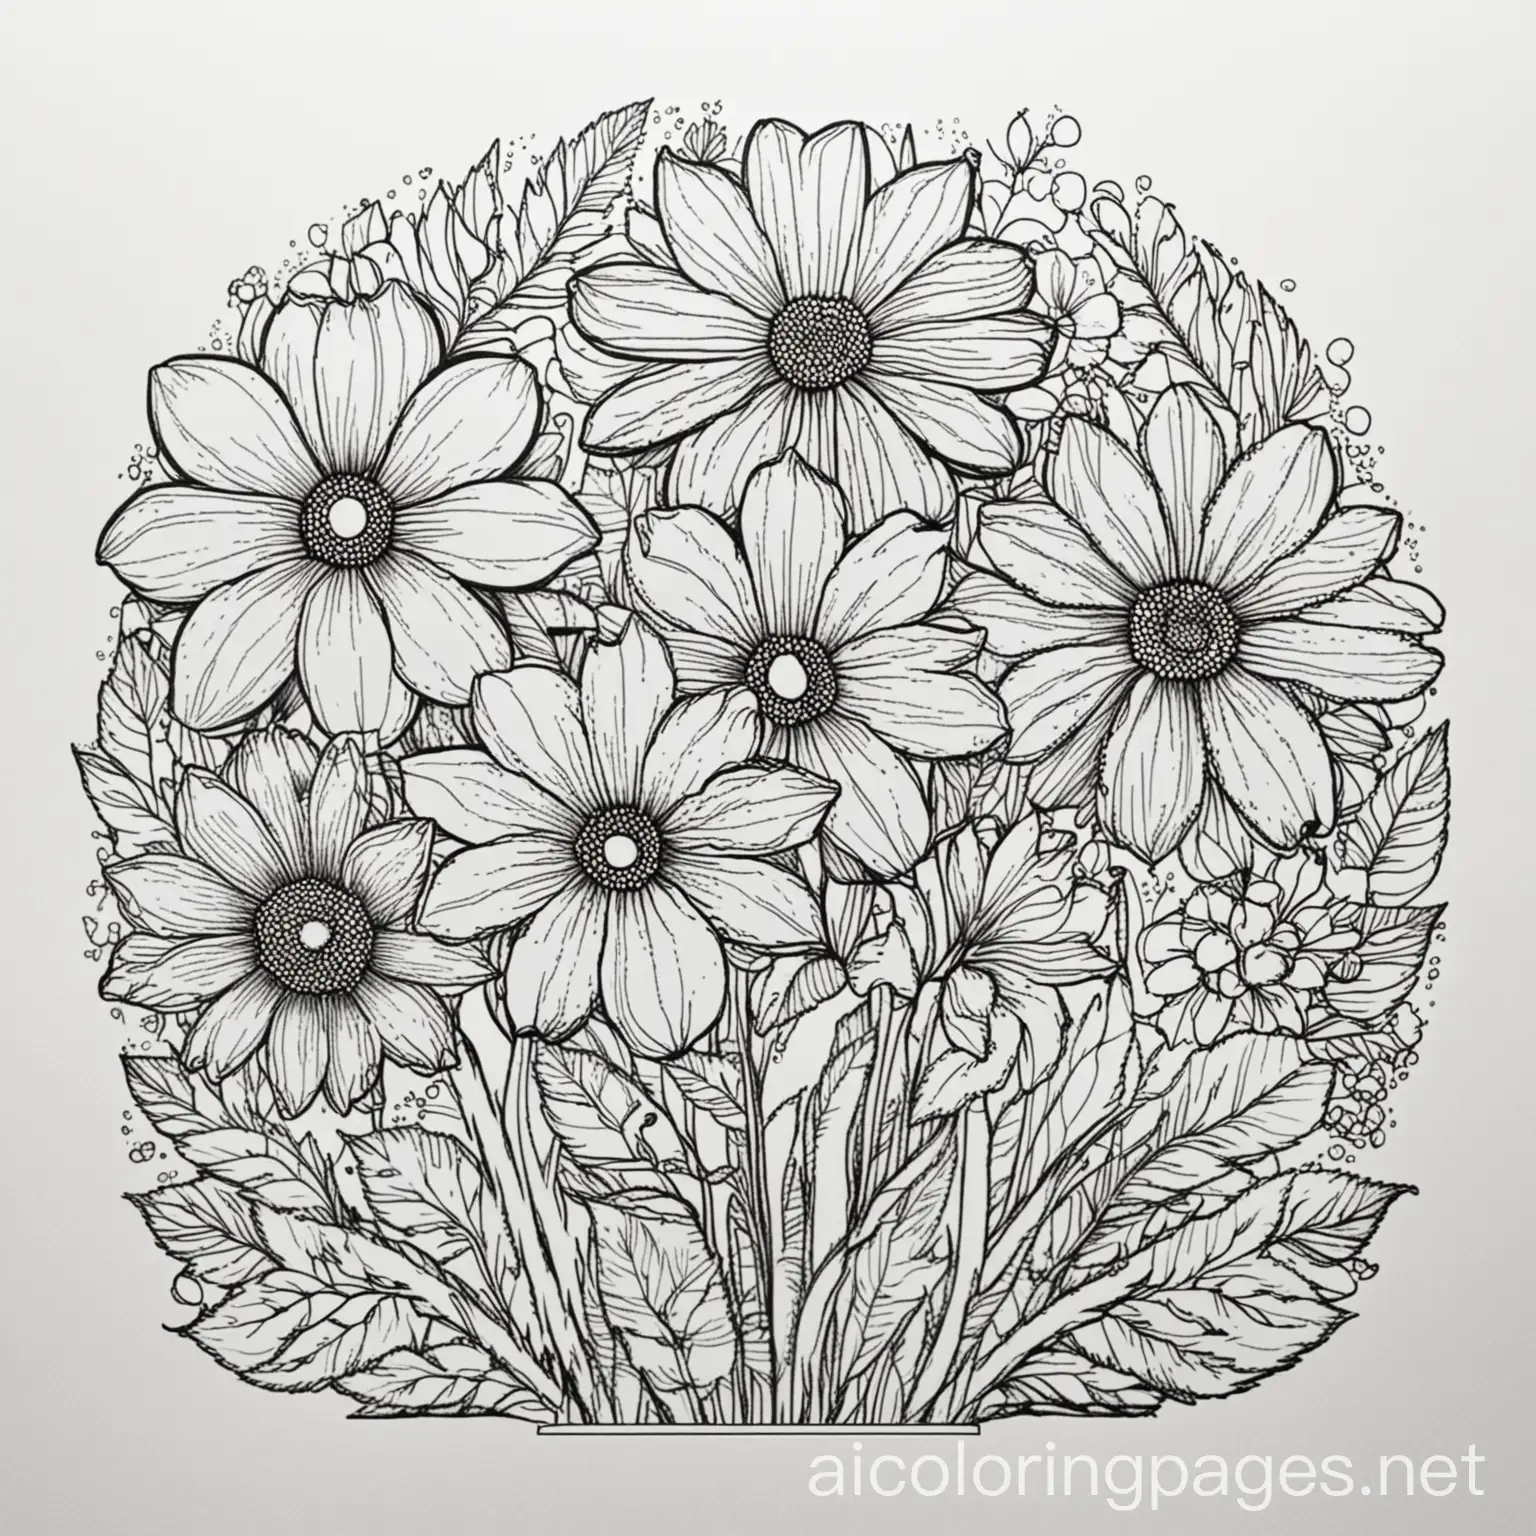 mandela flowers, Coloring Page, black and white, line art, white background, Simplicity, Ample White Space. The background of the coloring page is plain white to make it easy for young children to color within the lines. The outlines of all the subjects are easy to distinguish, making it simple for kids to color without too much difficulty